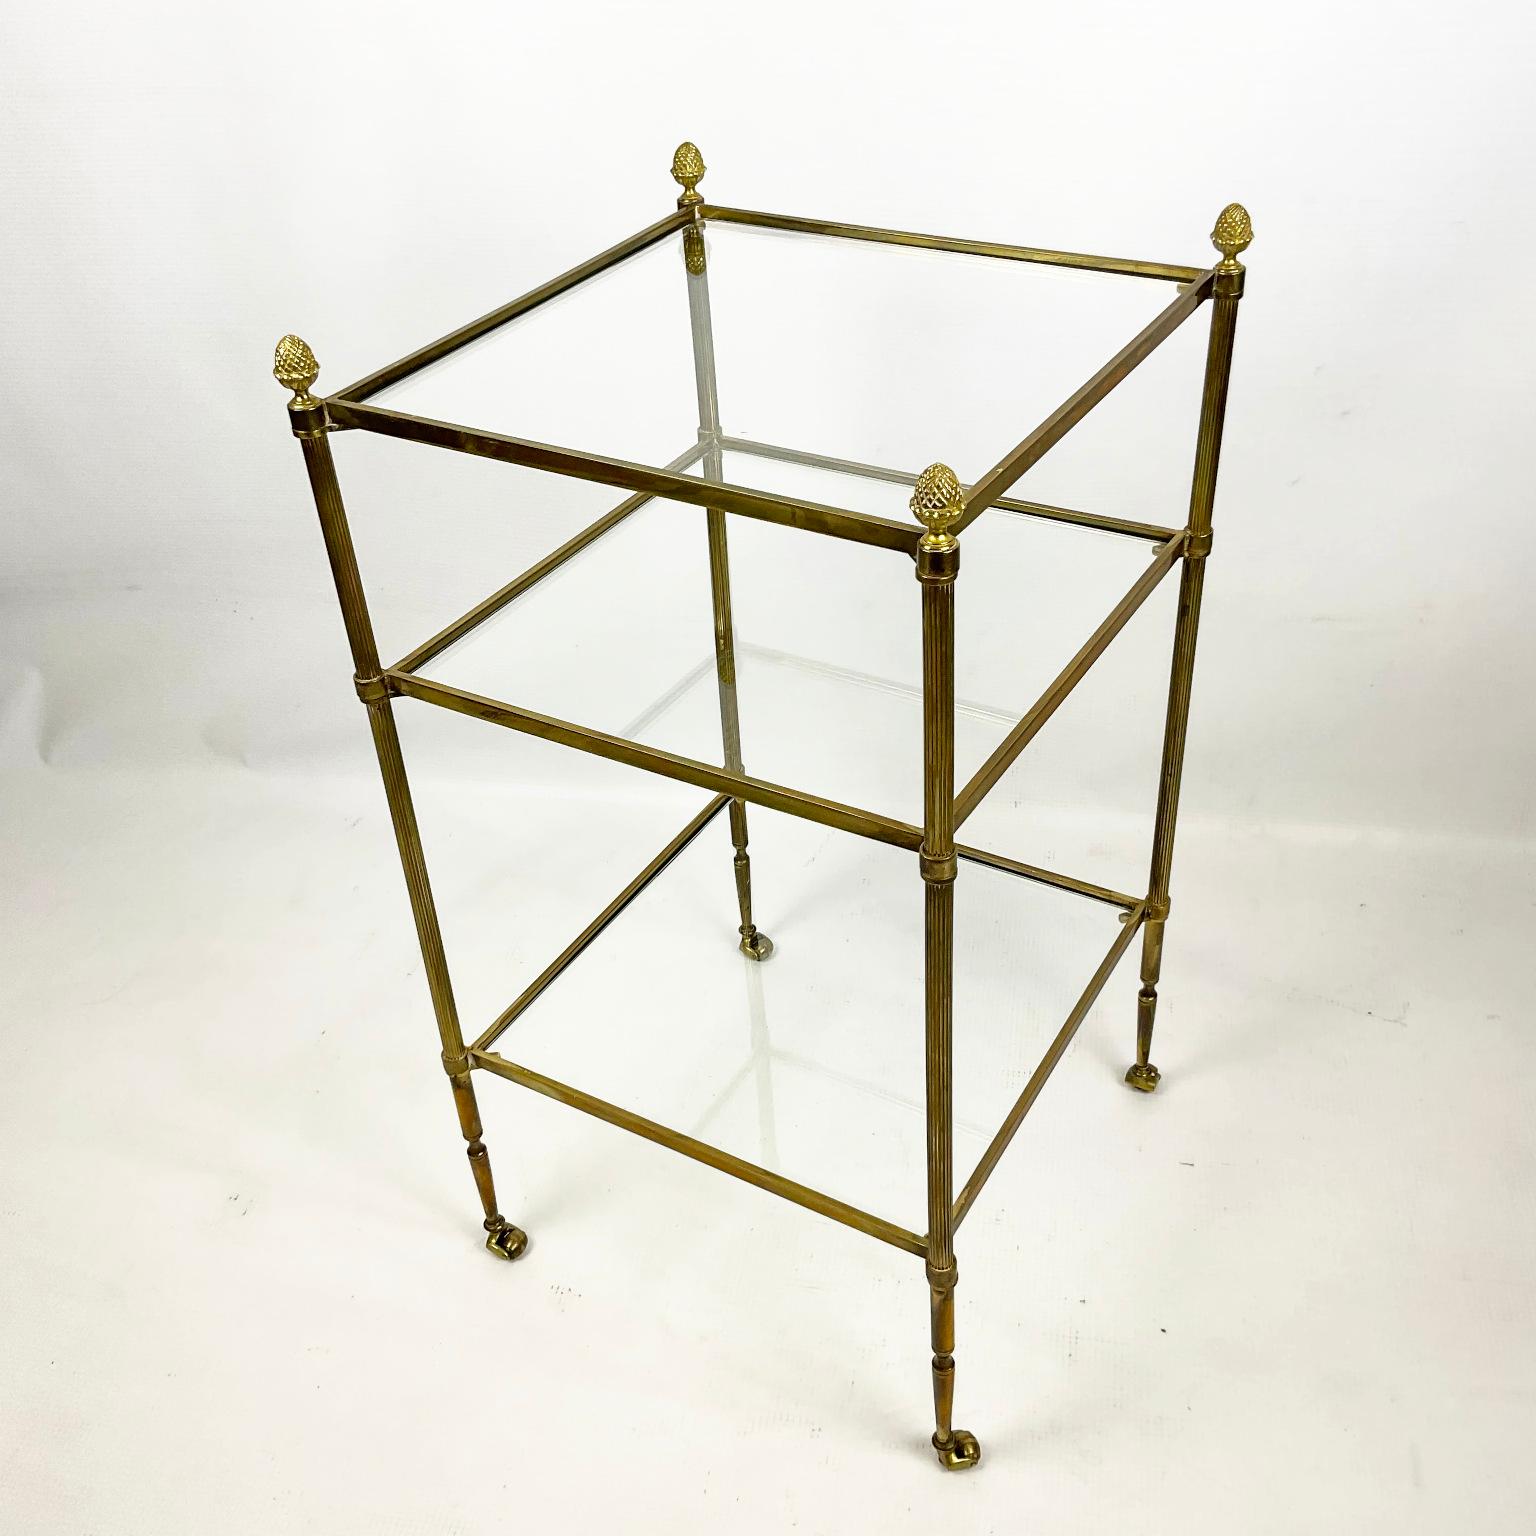 Neoclassical 1960s Brass Side Table with Pine Cones Decor Attributed to Maison Jansen France For Sale